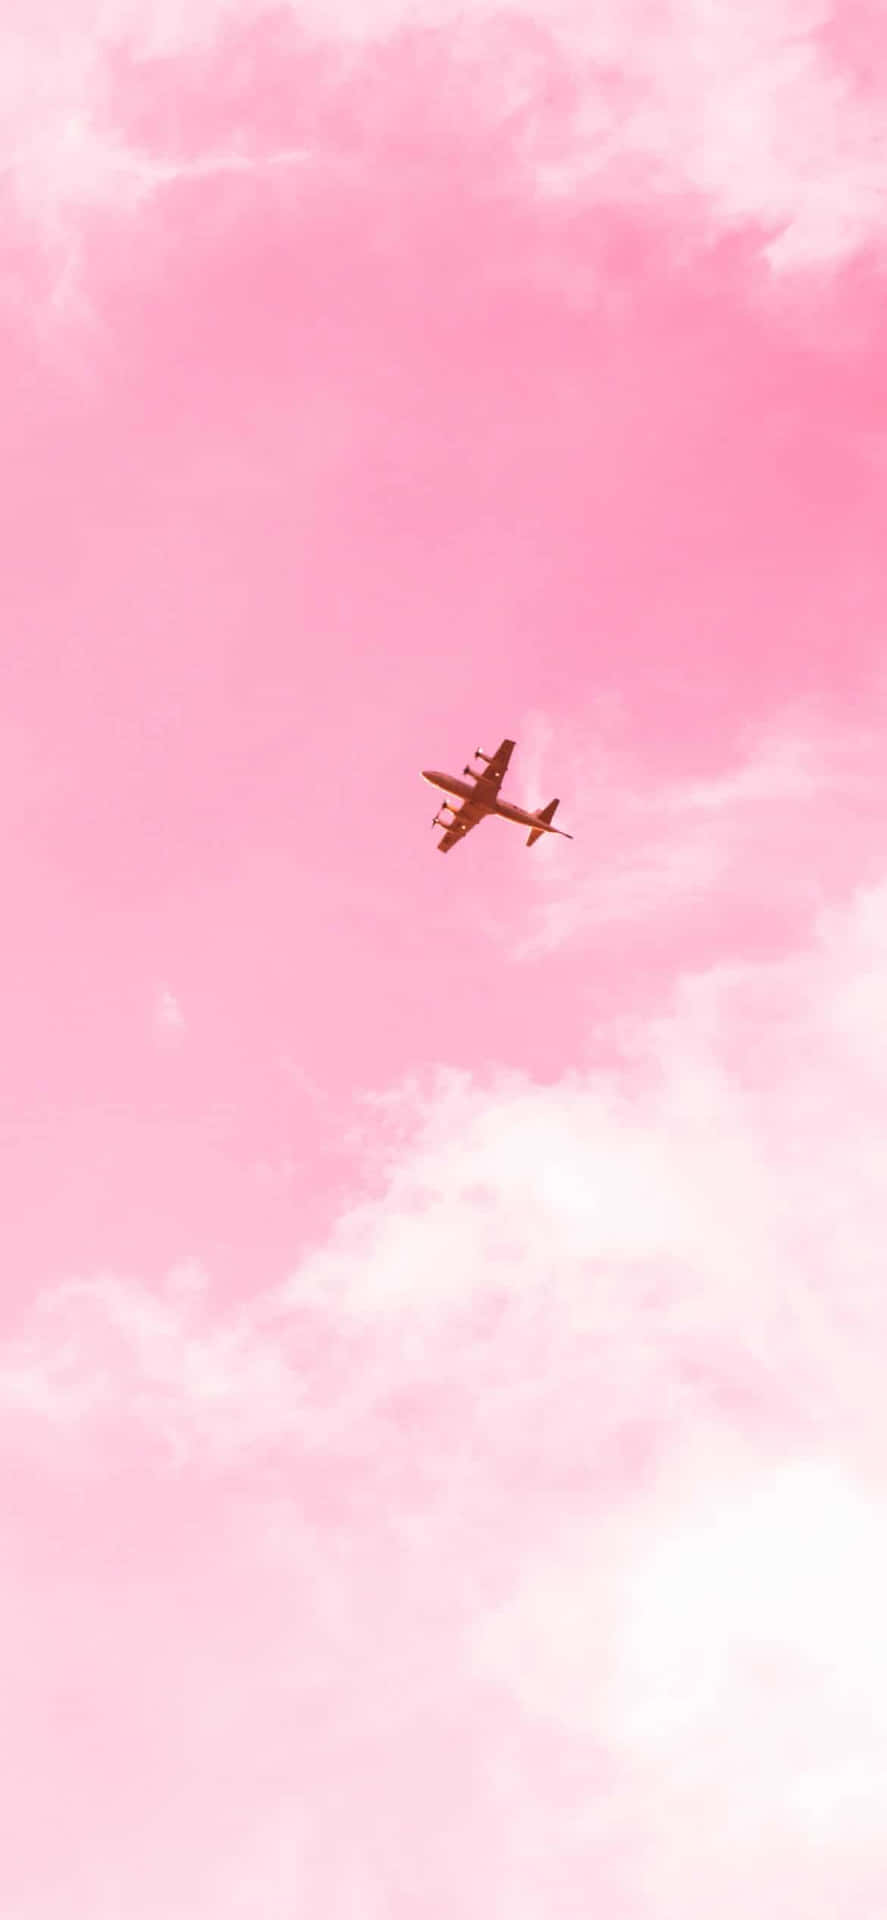 "Live Life In The Skies" Wallpaper